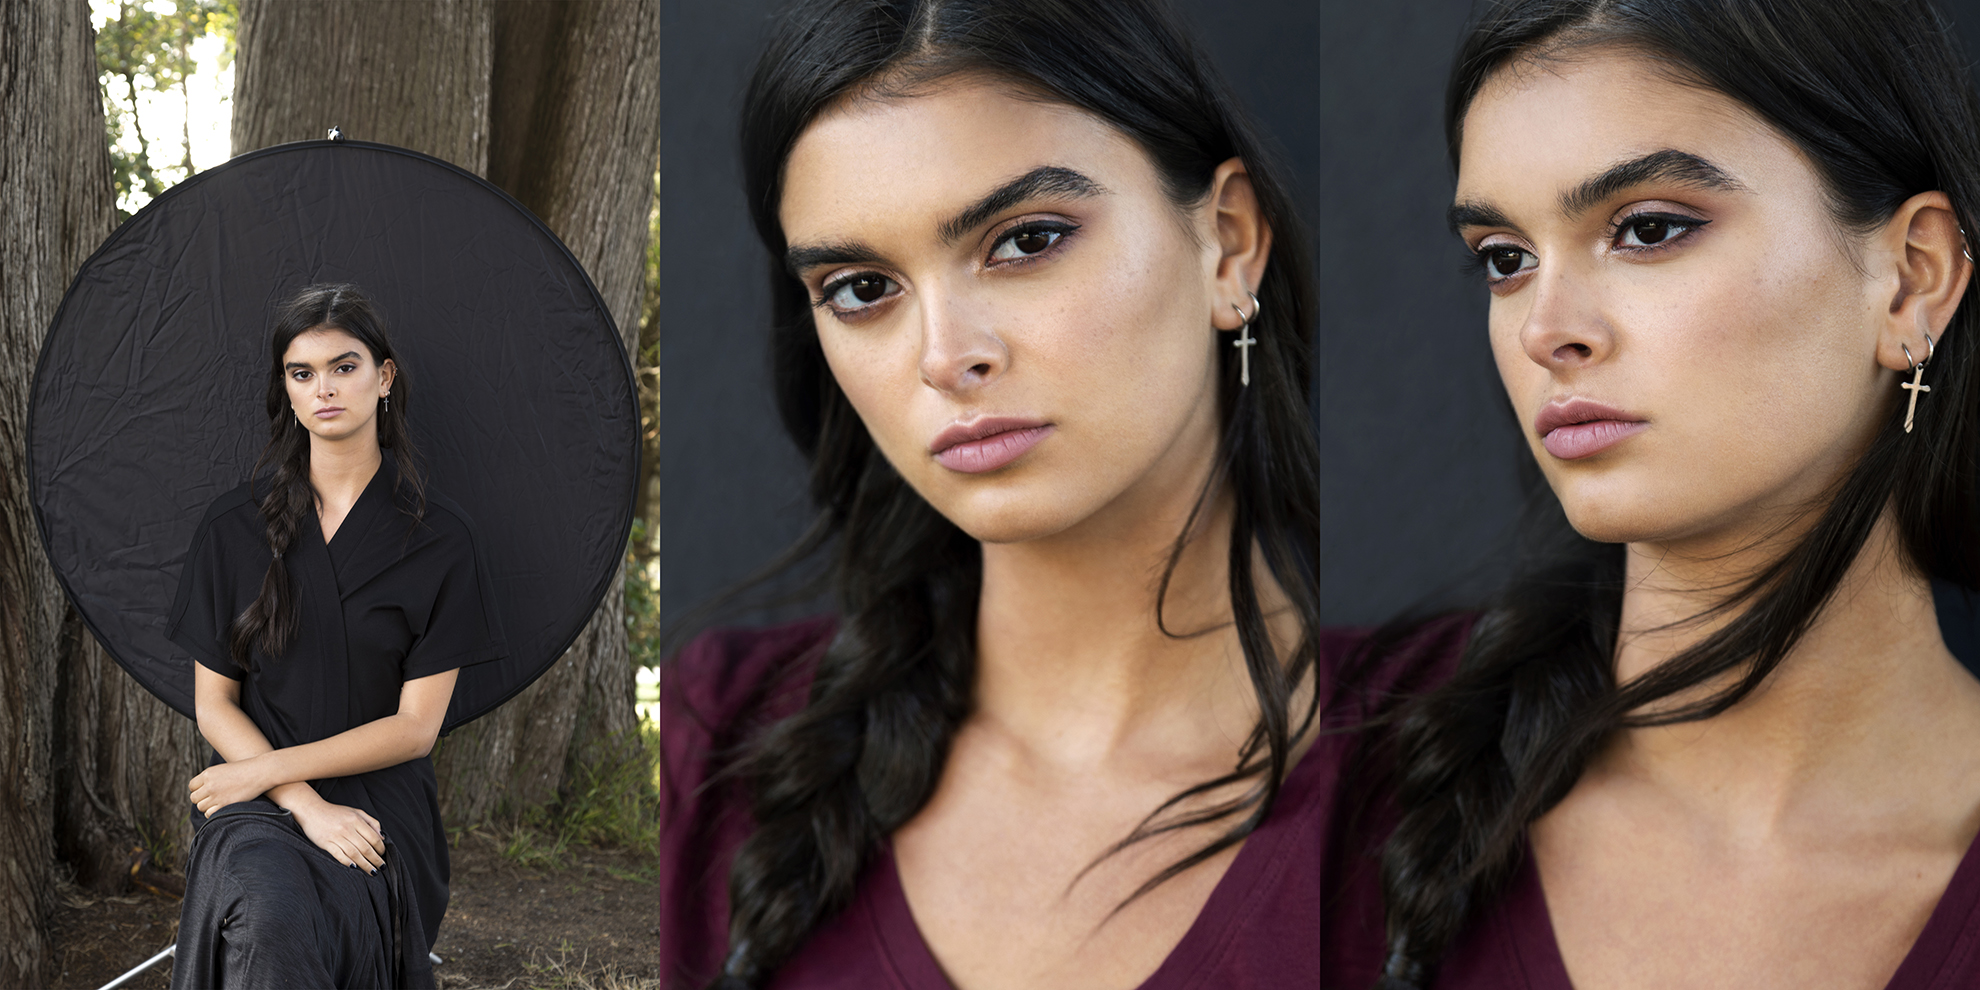 Portraits showing the black reflector and the results